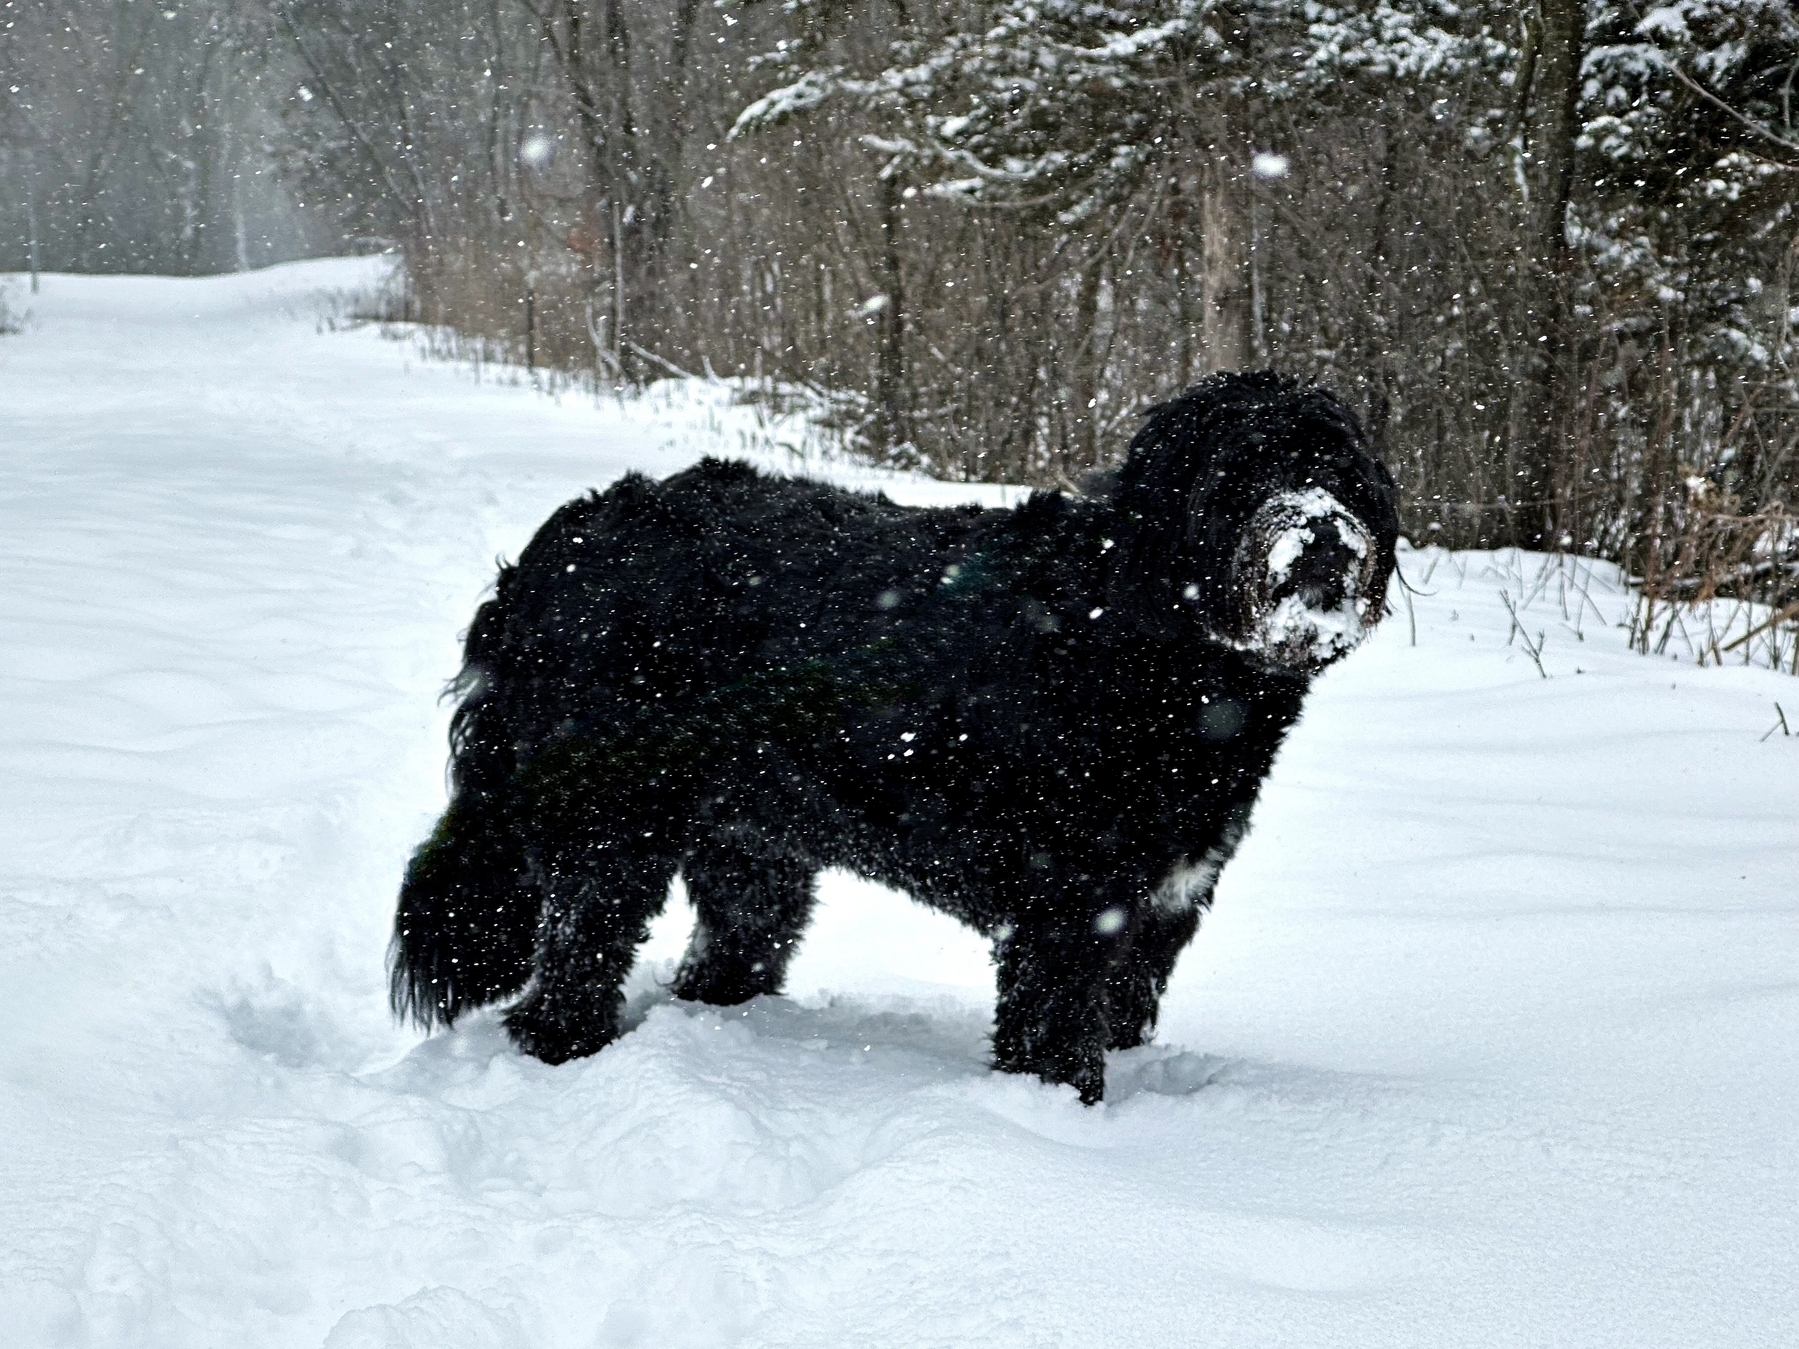 A black dog stands in the snow, flakes falling around, amidst a wintery forest backdrop.